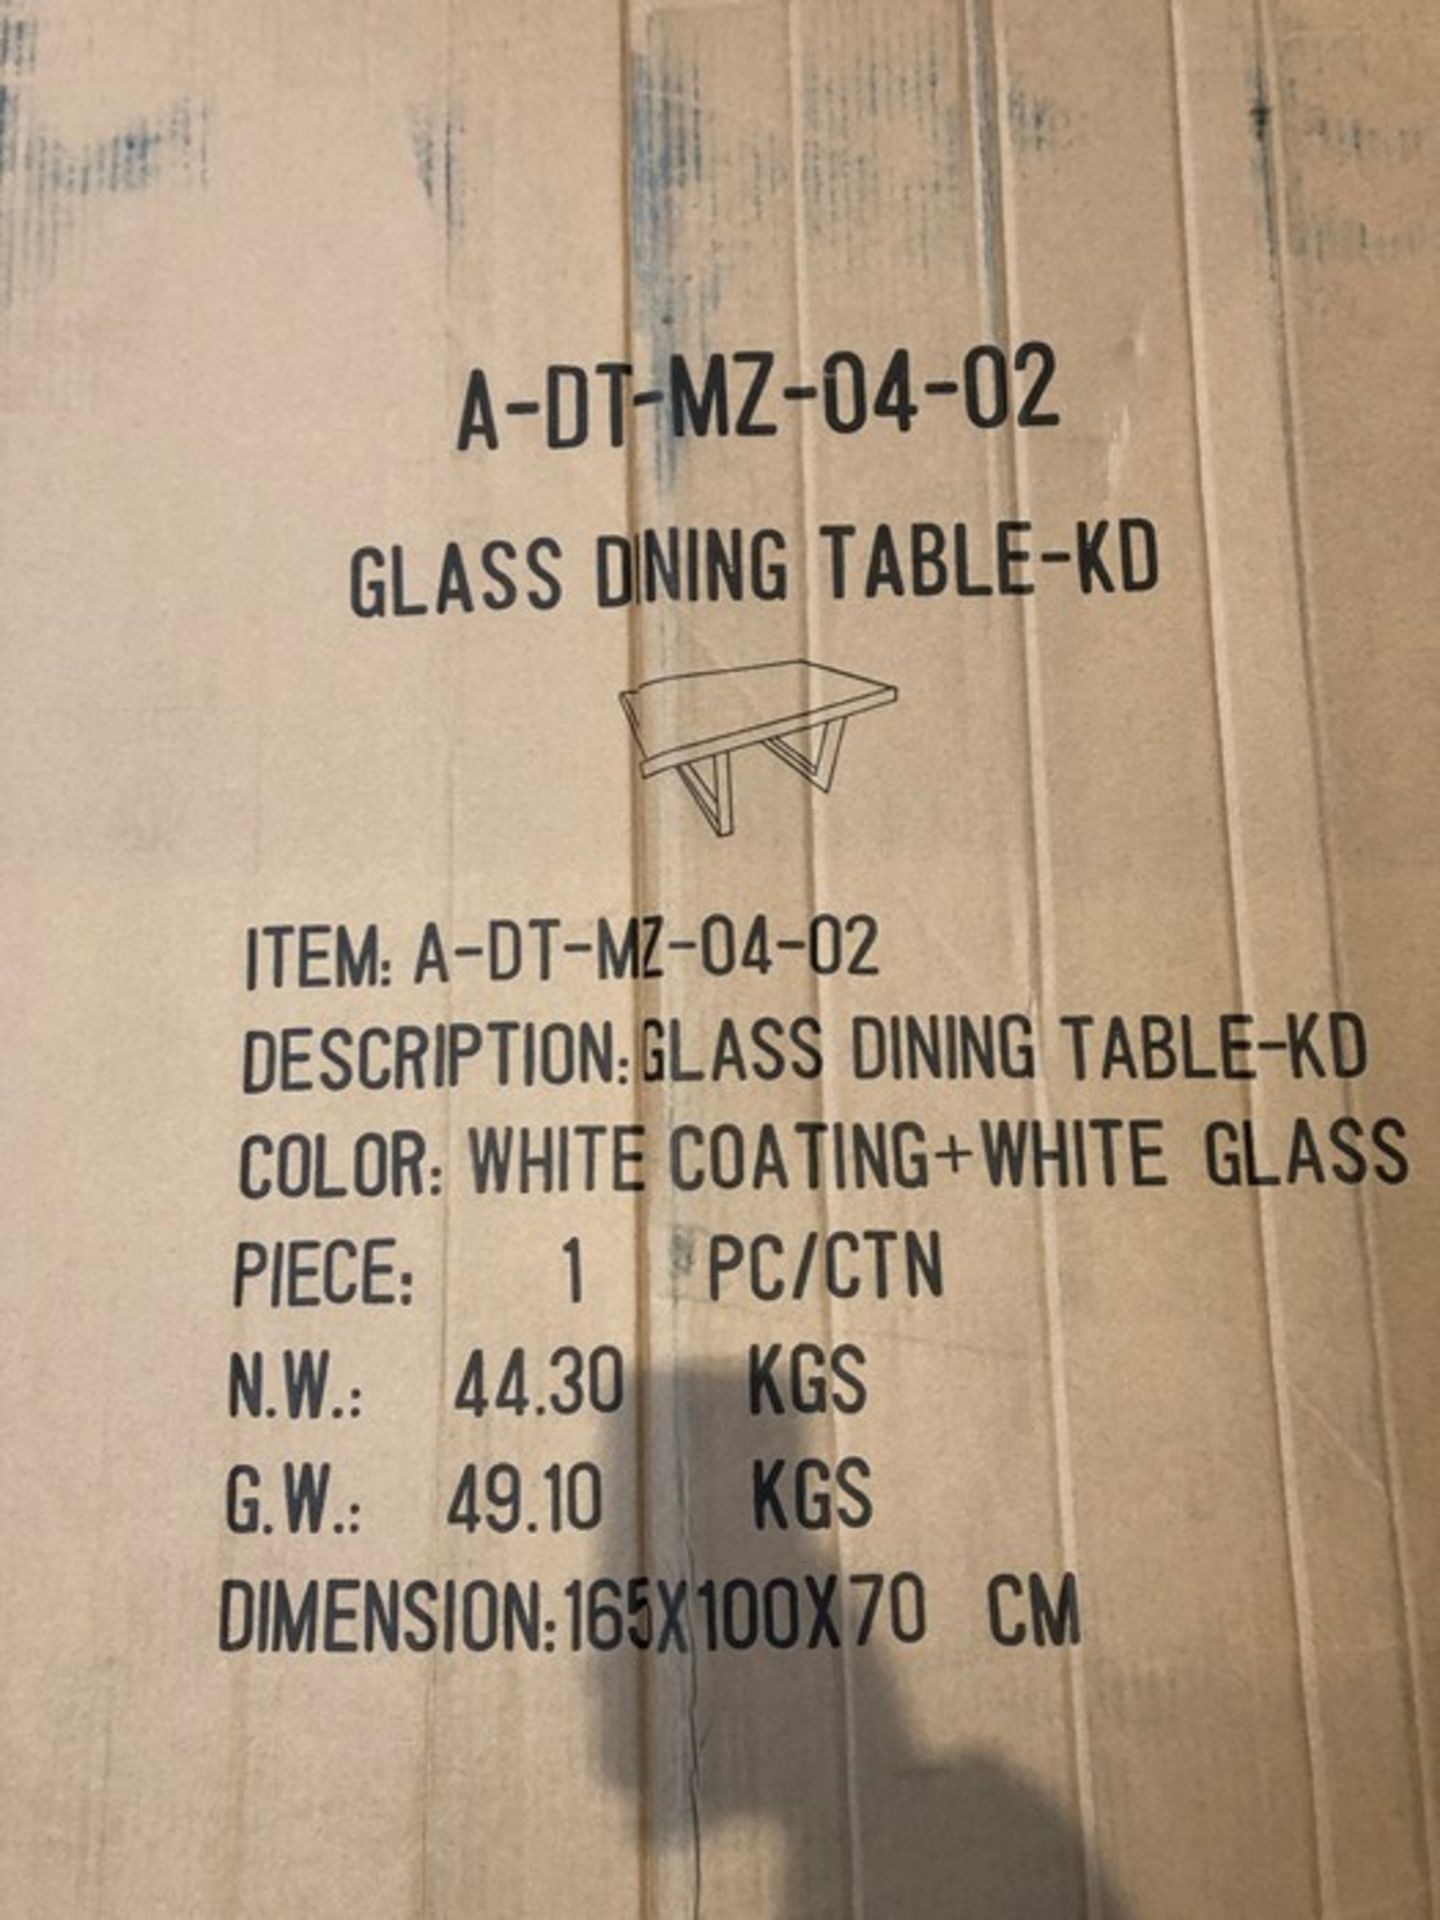 1 BOXED 6 SEATER GLASS DINING TABLE-KD IN WHITE COATING AND WHITE GLASS (PUBLIC VIEWING AVAILABLE)